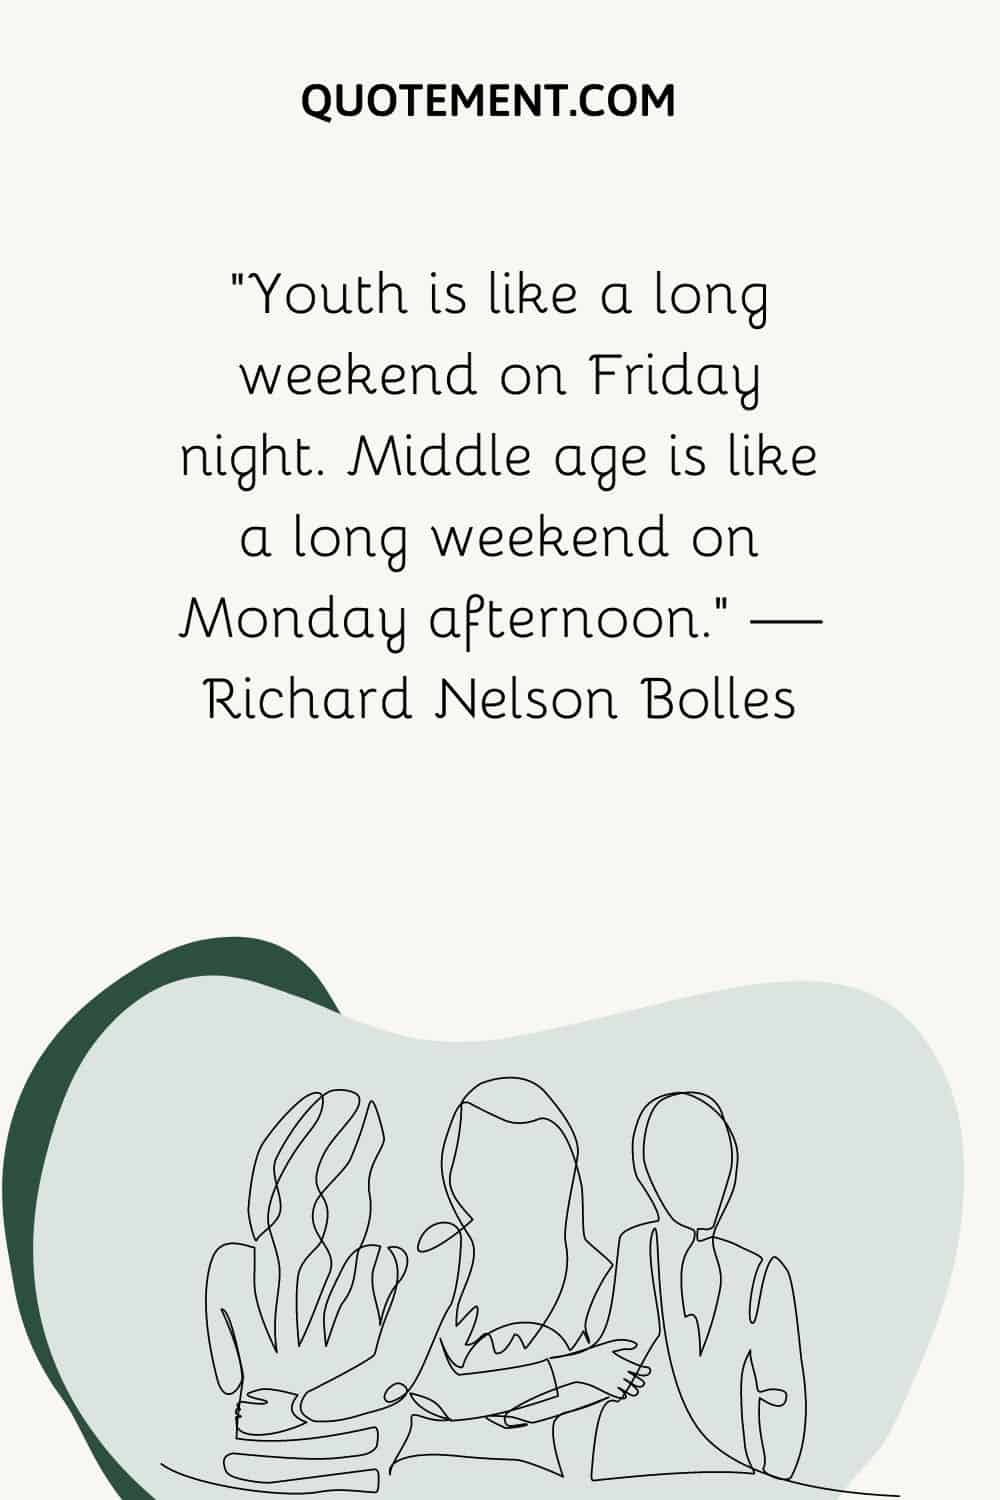 “Youth is like a long weekend on Friday night. Middle age is like a long weekend on Monday afternoon.” — Richard Nelson Bolles